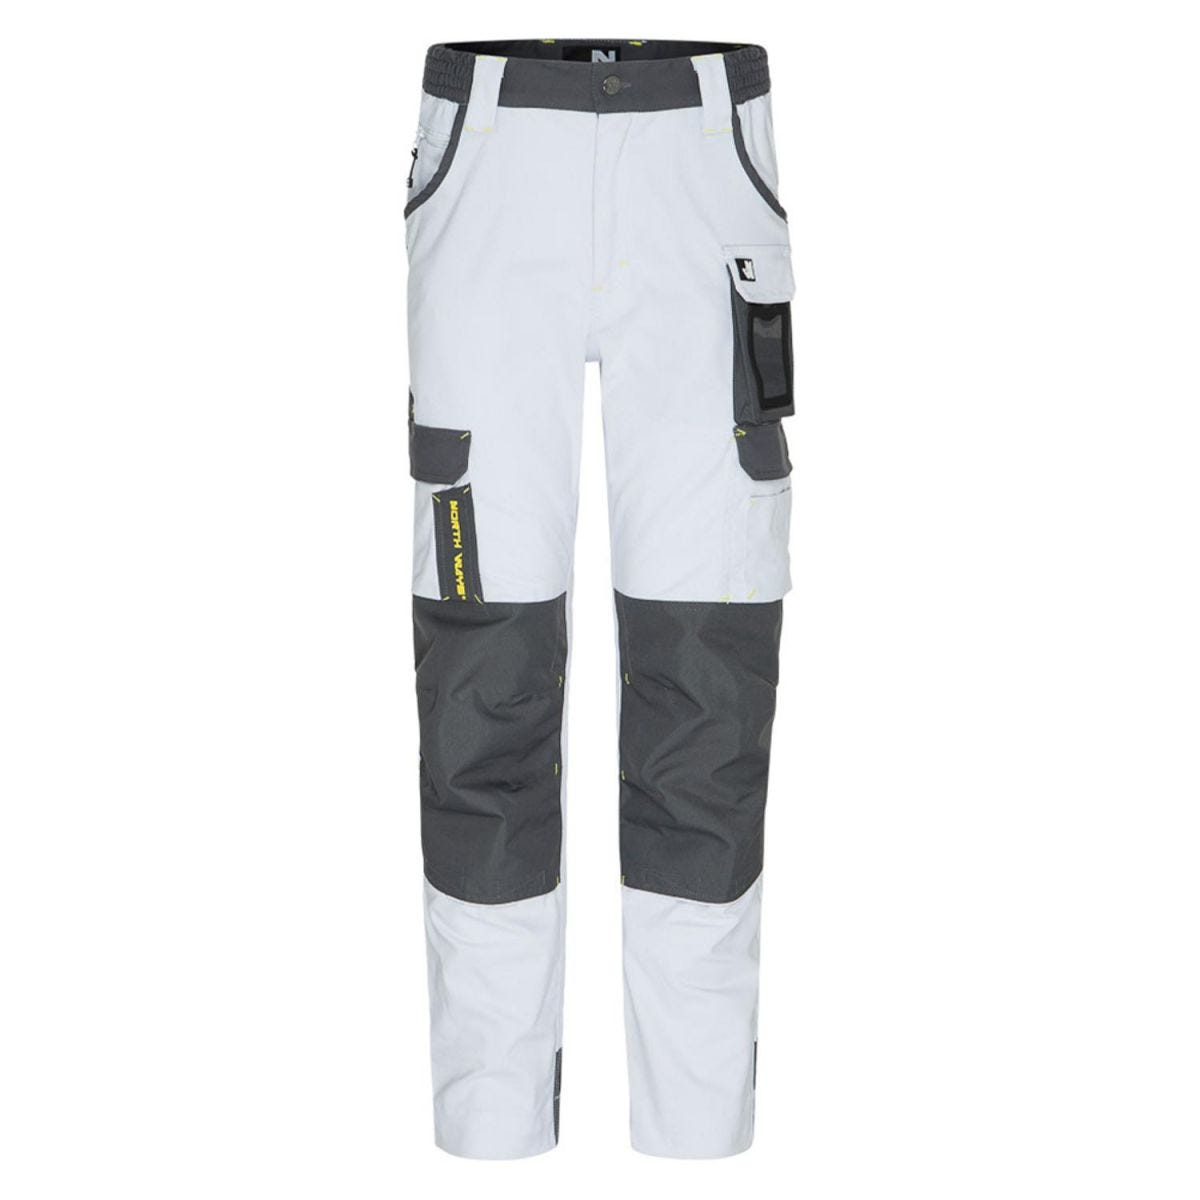 Pantalon de travail multipoches Cary blanc - North Ways - Taille 36 1